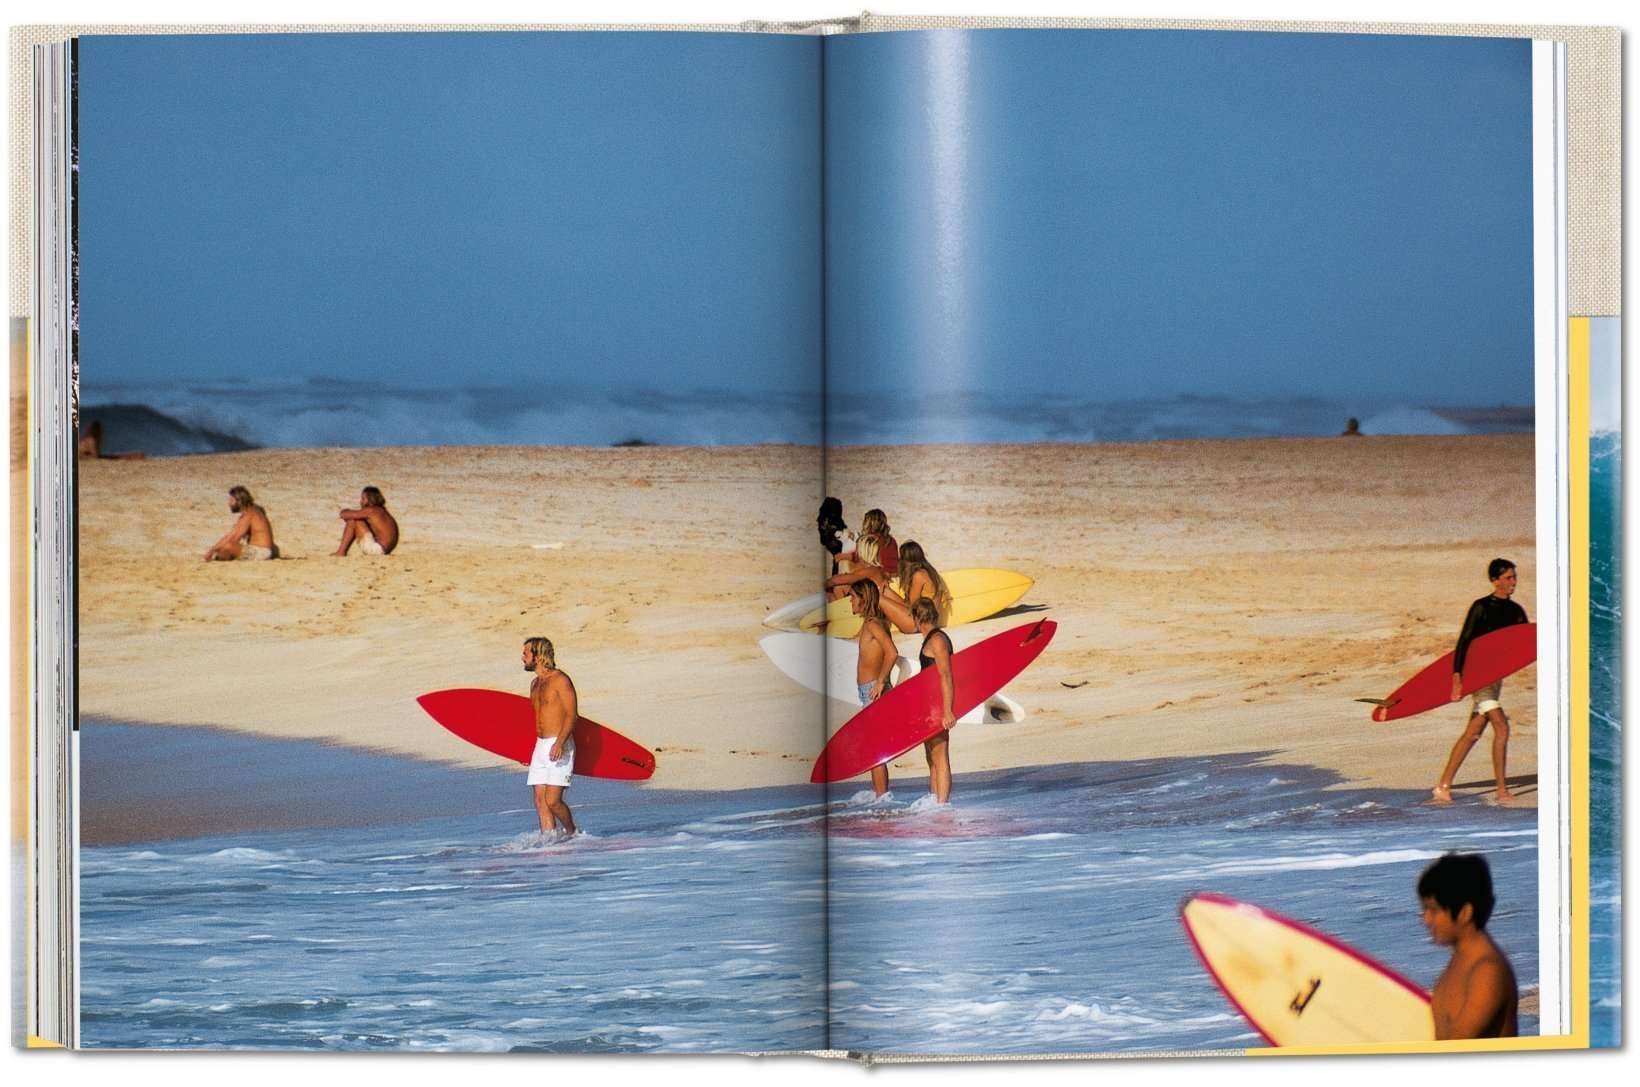 LeRoy Grannis. Surf Photography of the 1960s and 1970s DEIMOTIV